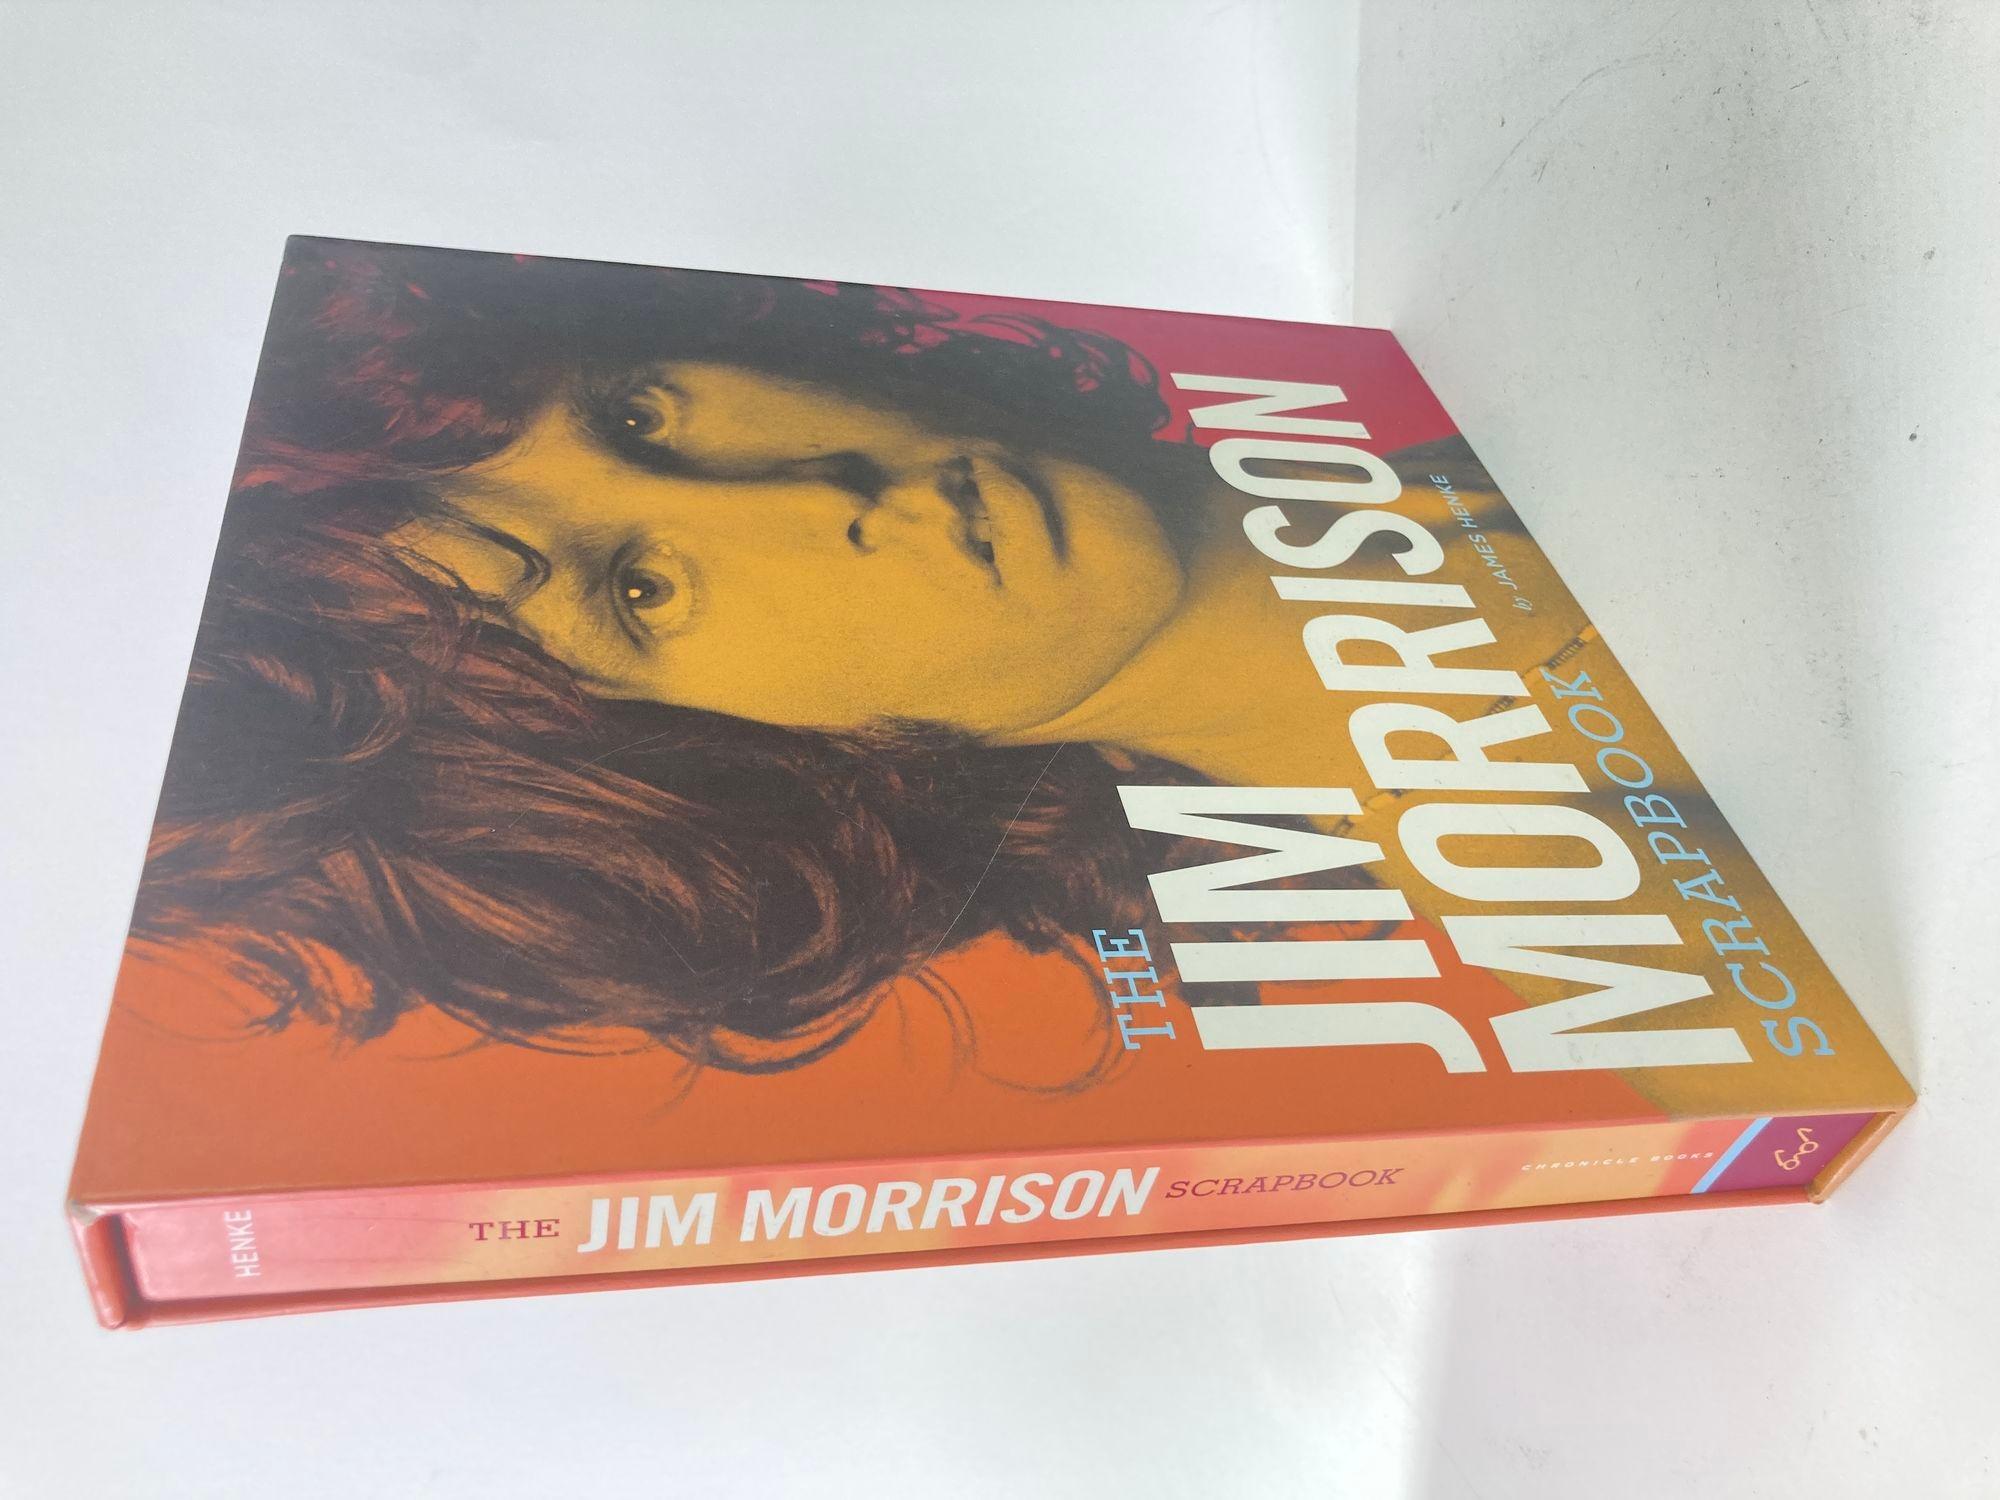 The Jim Morrison Scrapbook by Jim Henke (Author).Hardcover book in sleeve with CD.Produced with the fl cooperation of the Morrison estates, The Jim Morrison Scrapbook captures the wild life, mysterious death, and enduring work of the Doors'